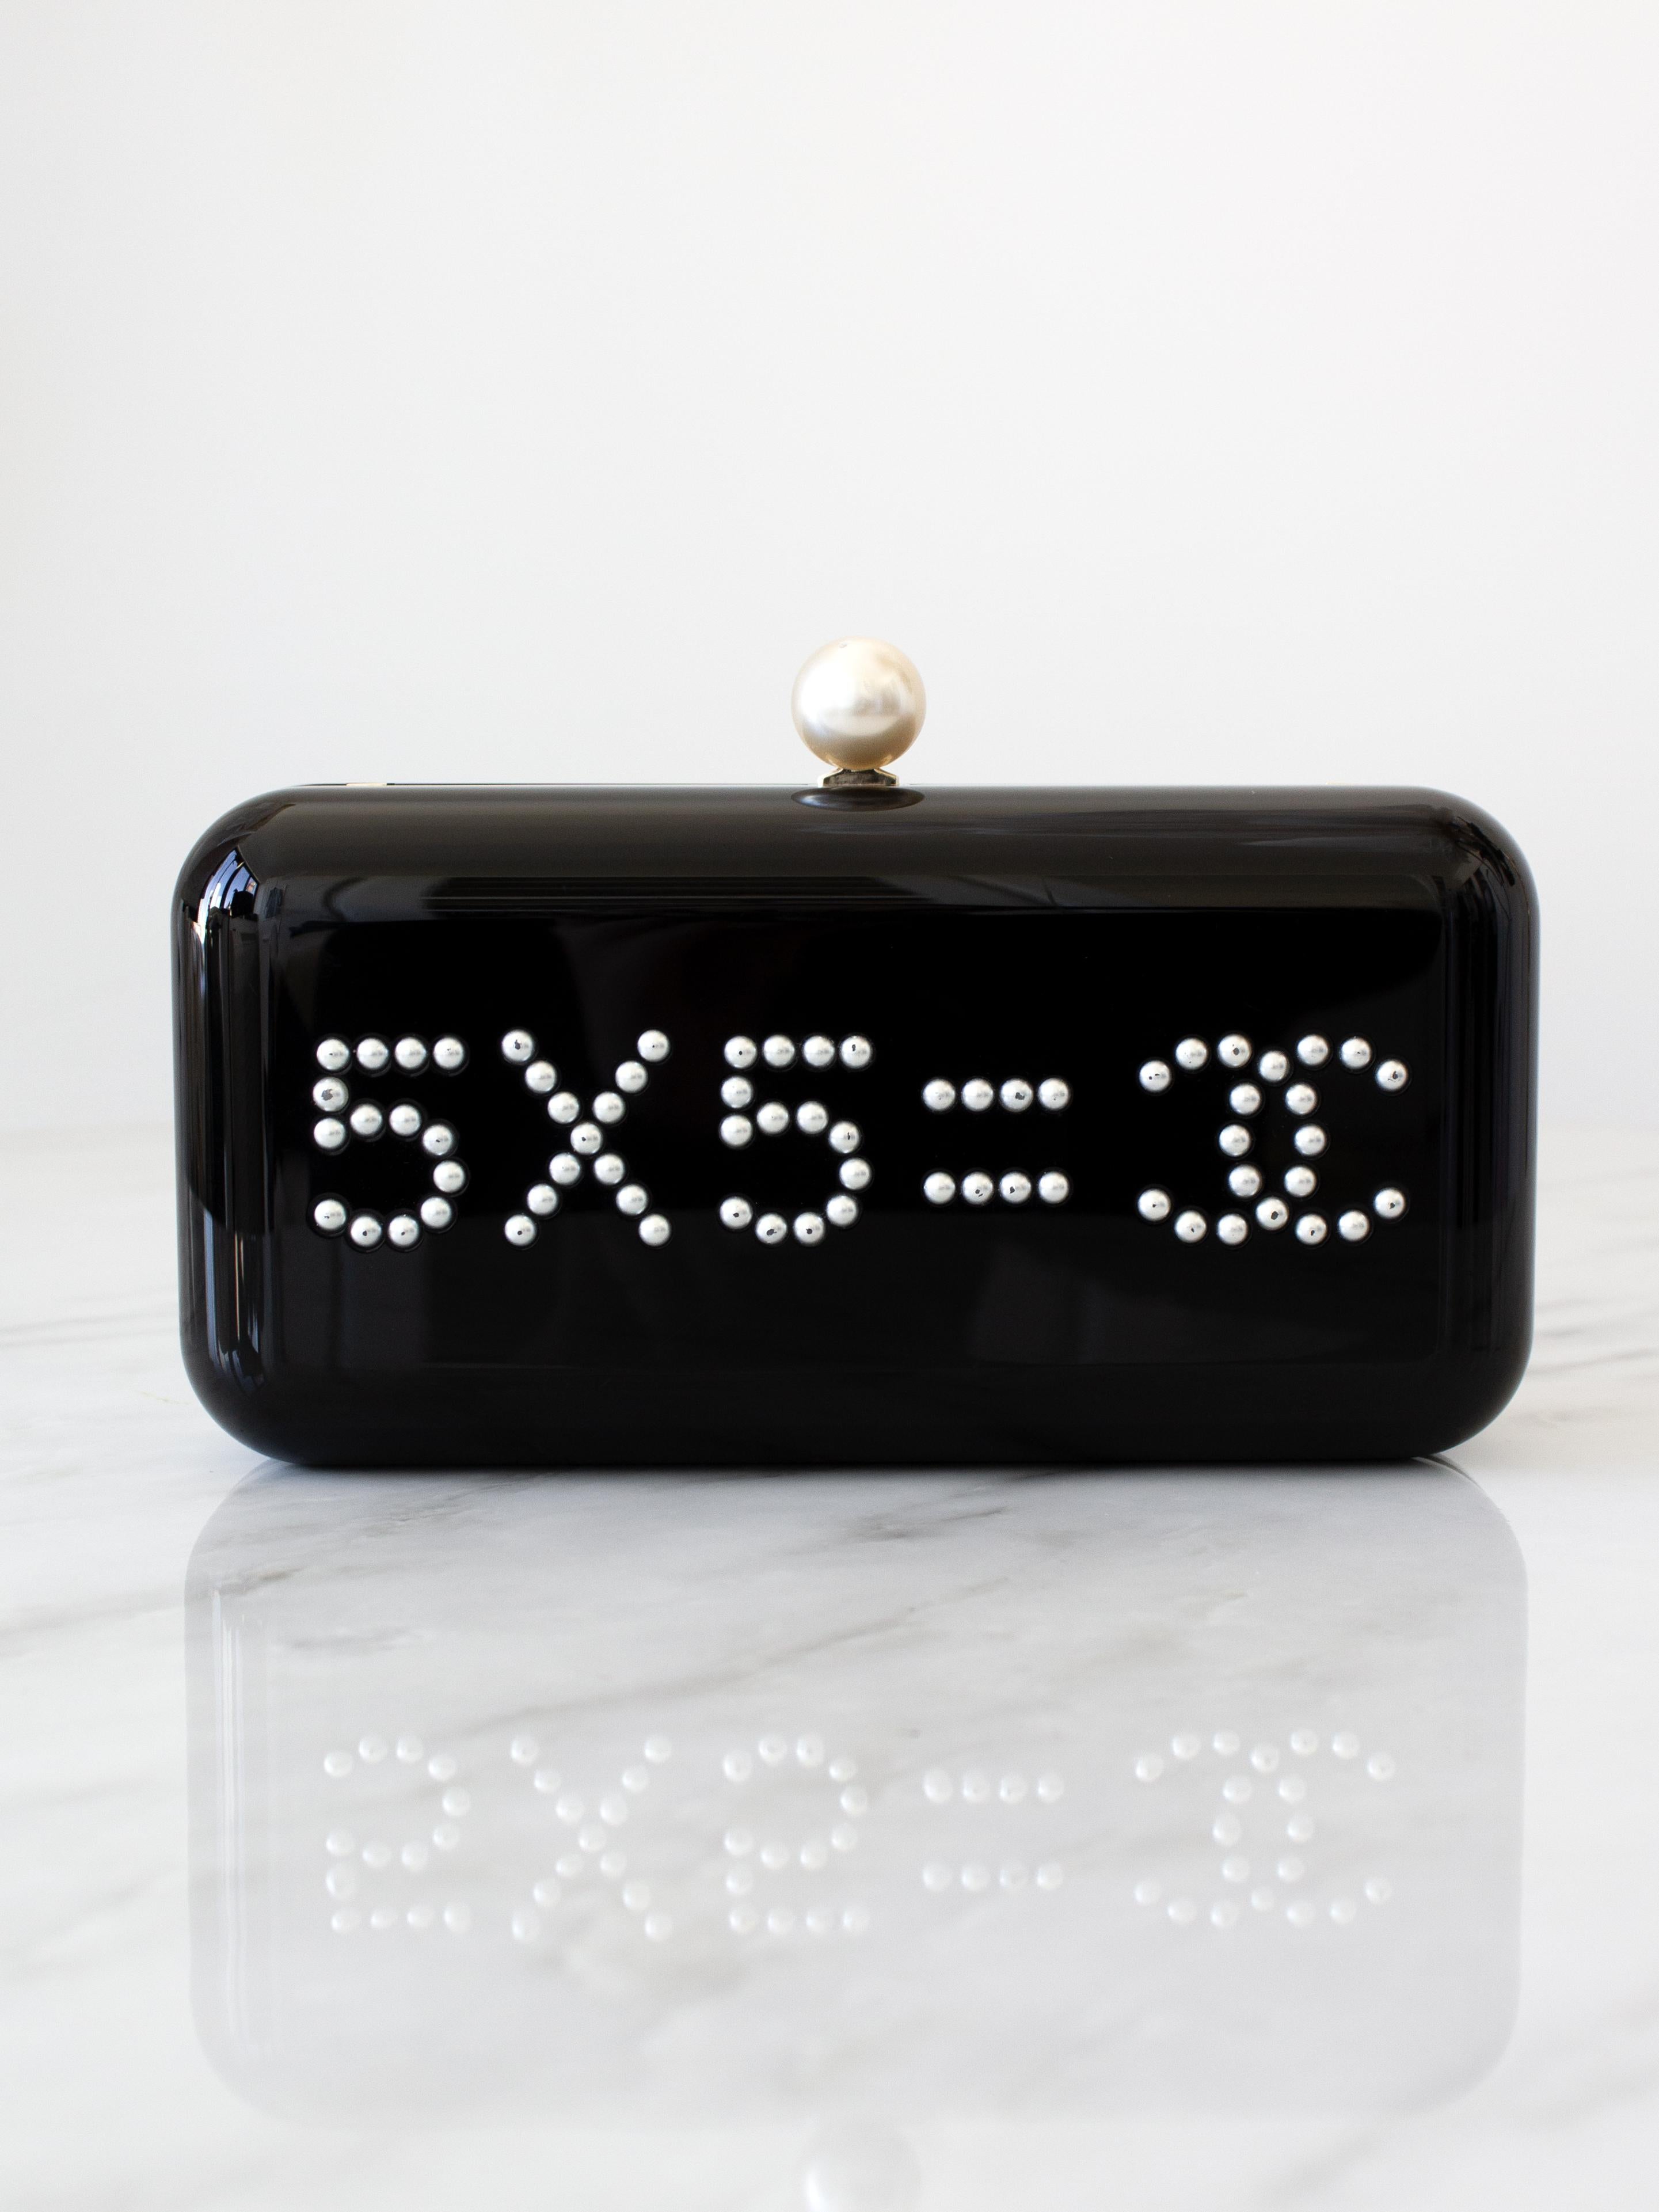 Chanel 2015 Votez Coco Black Pearl Plexiglass Minaudiere Evening Clutch Bag In Good Condition For Sale In Jersey City, NJ